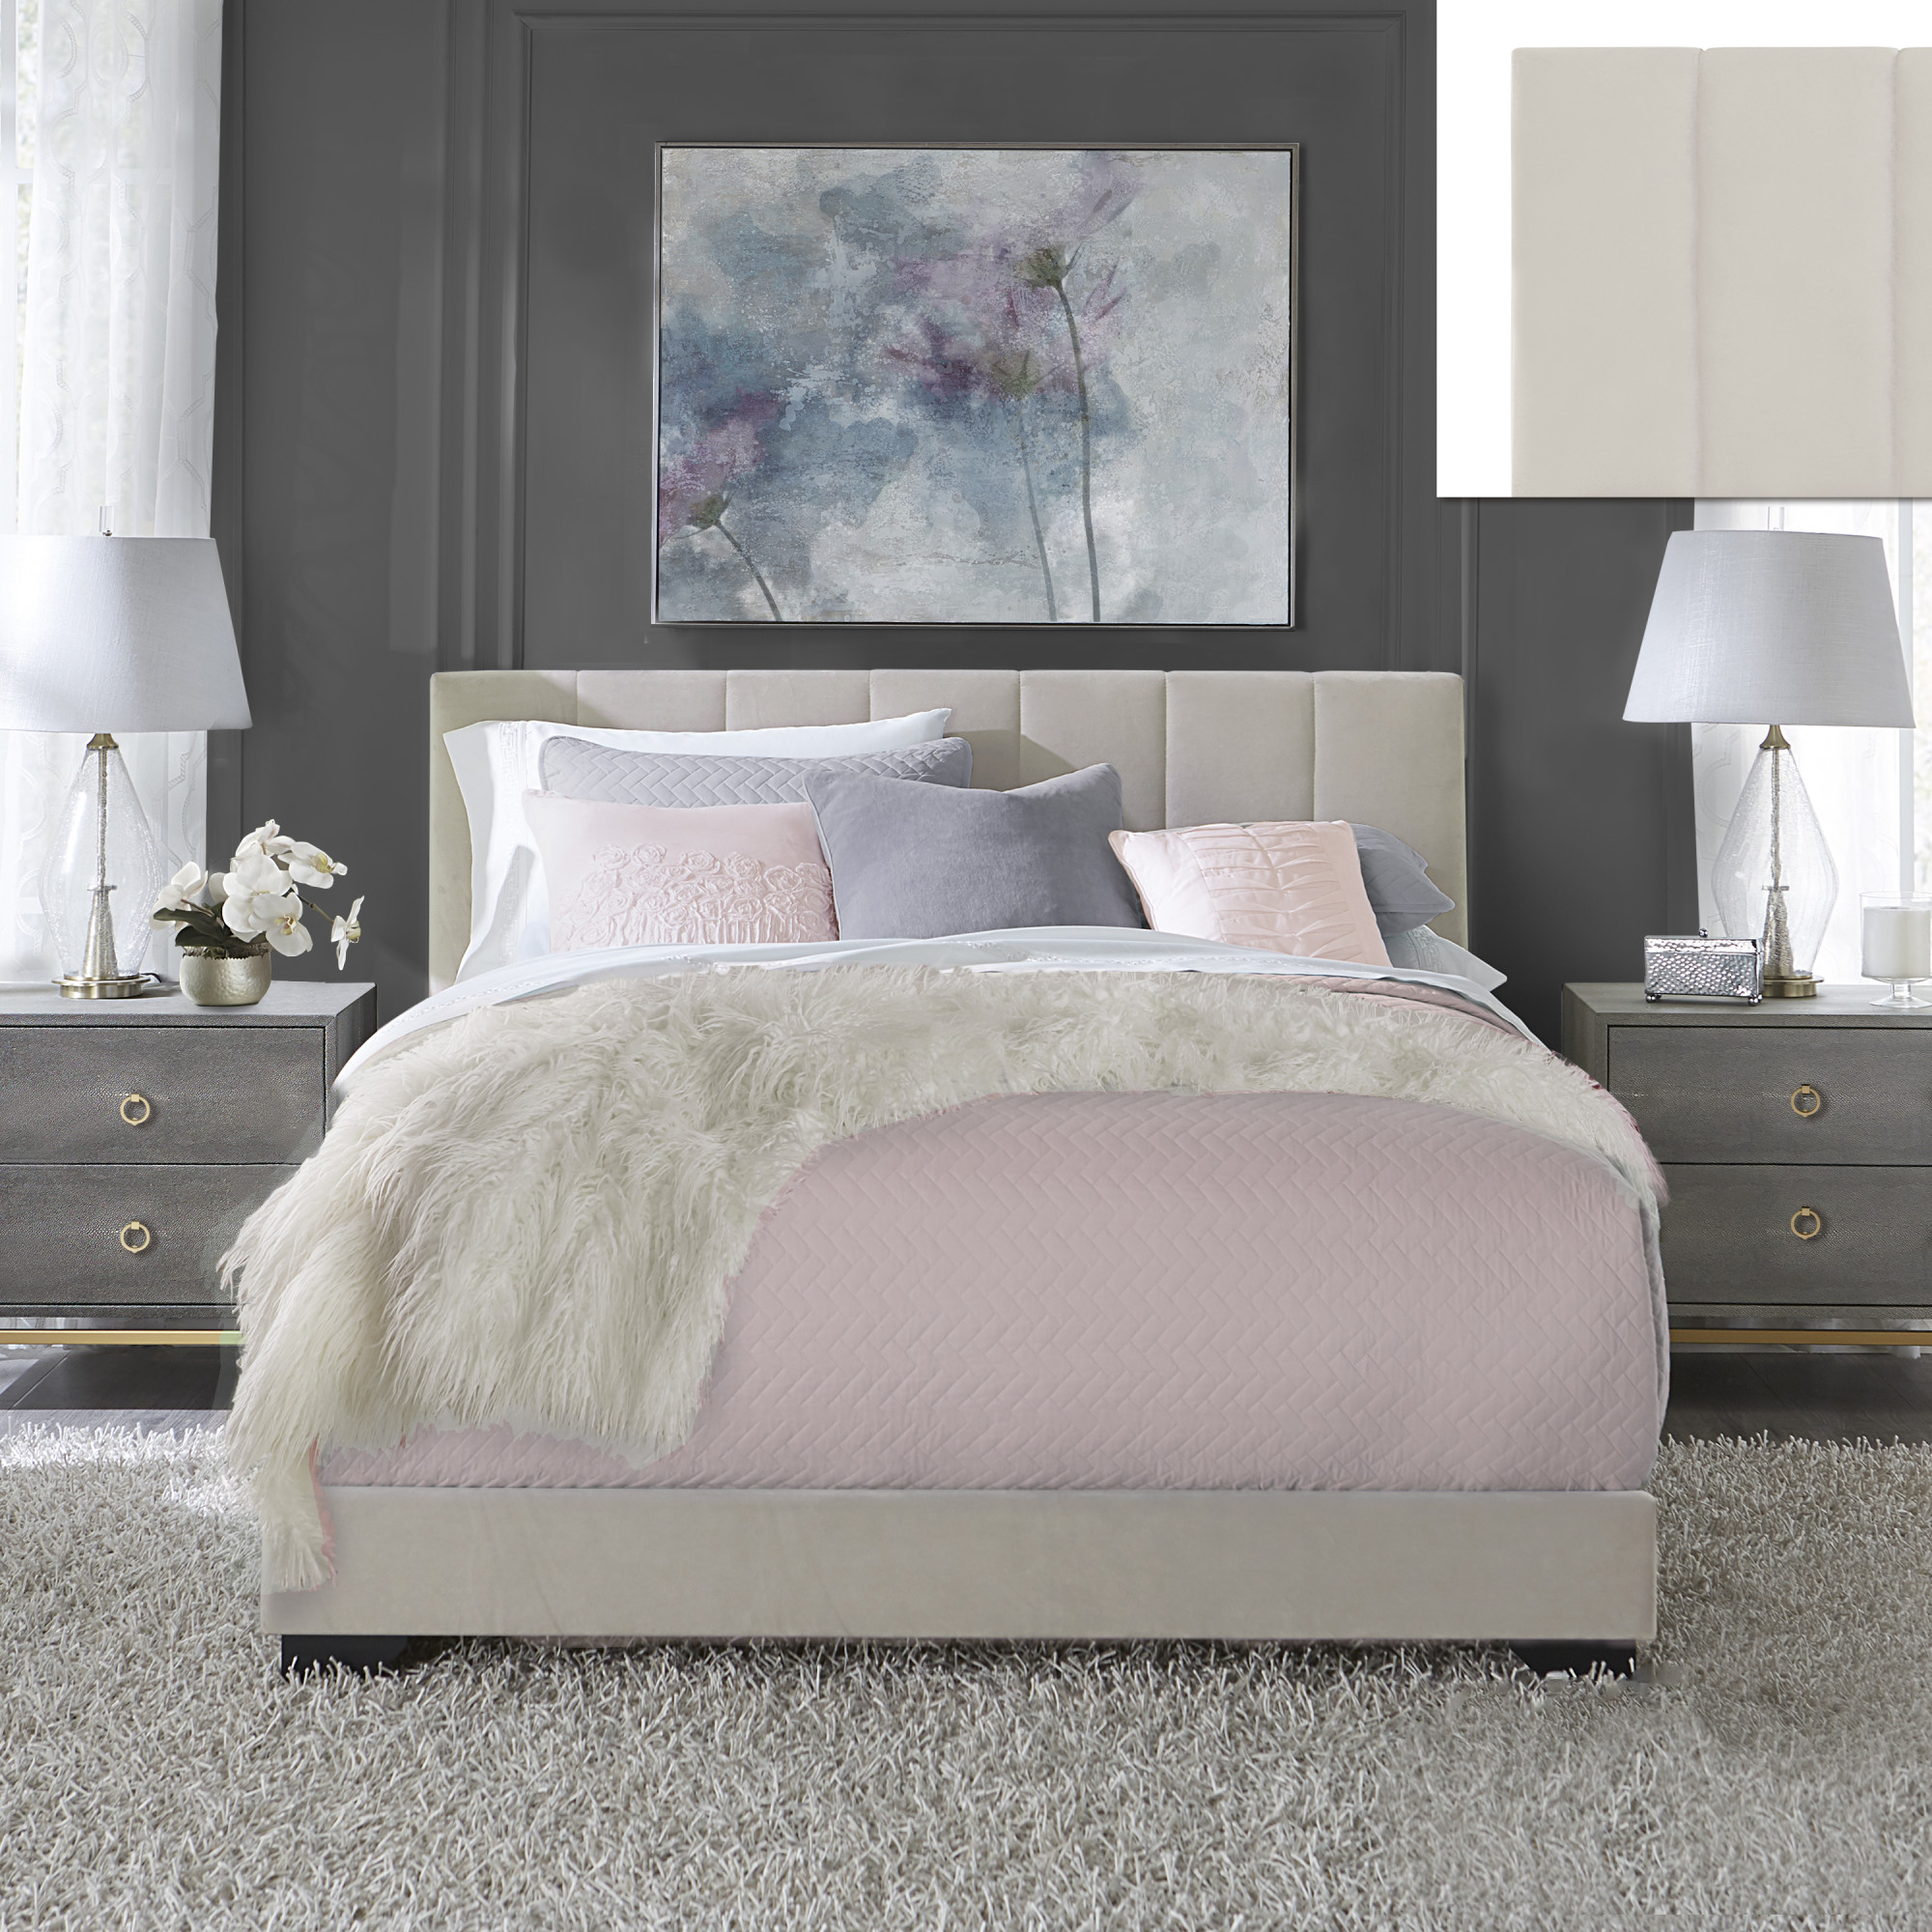 Reece Channel Stitched Upholstered Queen Bed, Ivory, by Hillsdale Living Essentials - image 3 of 17